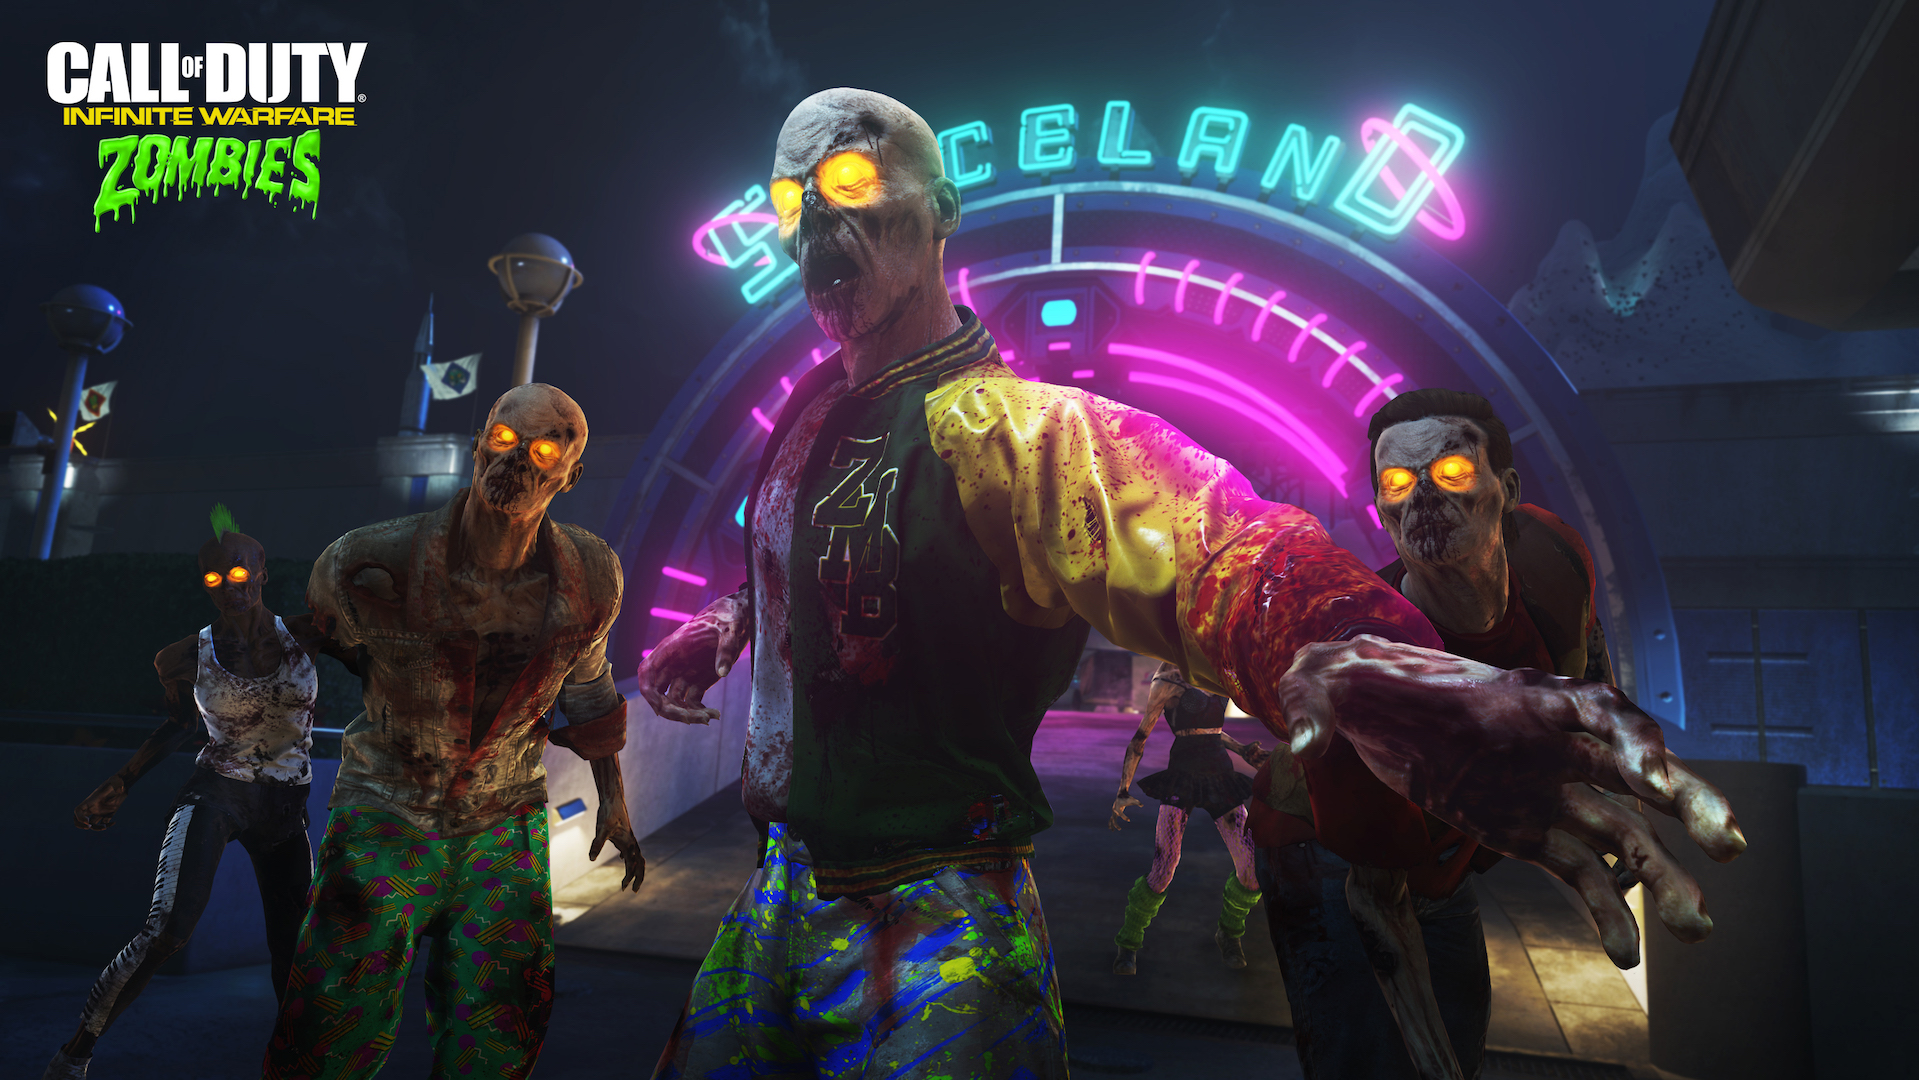 Call of Duty: Infinite Warfare Zombies - Spaceland Zombies 